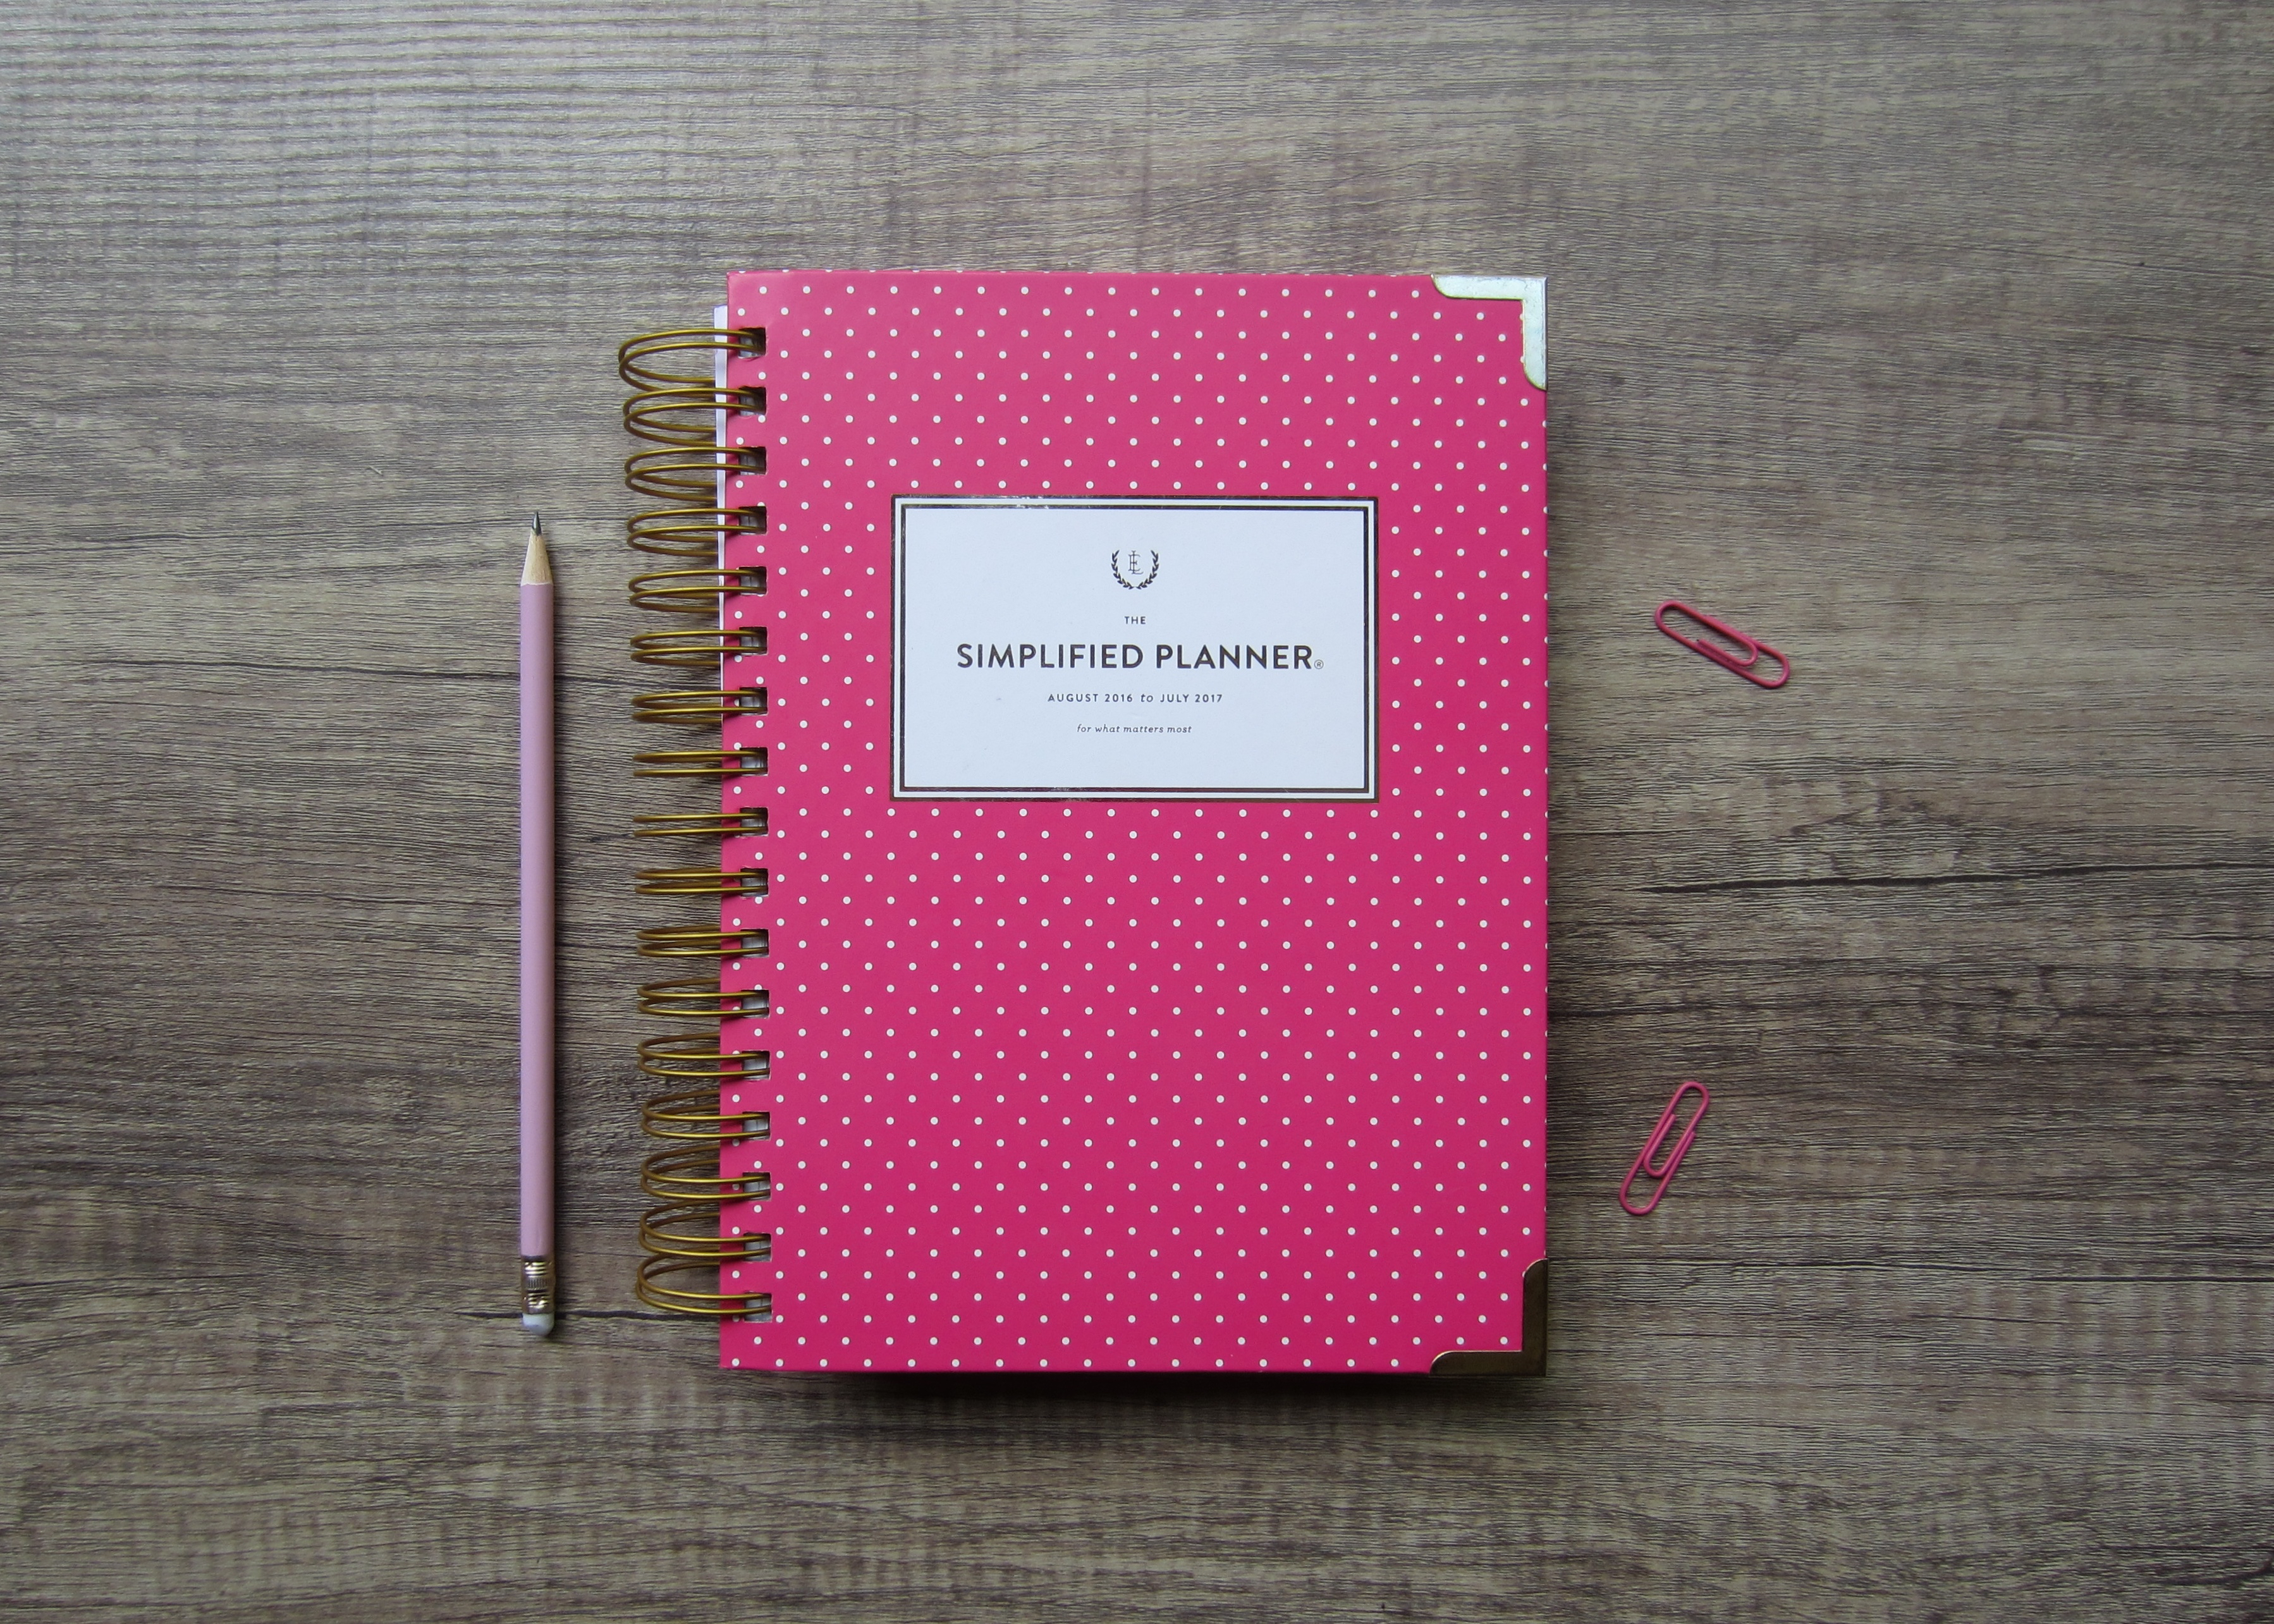 #girlboss must-have | Simplified Planner Review | FemmeSociety